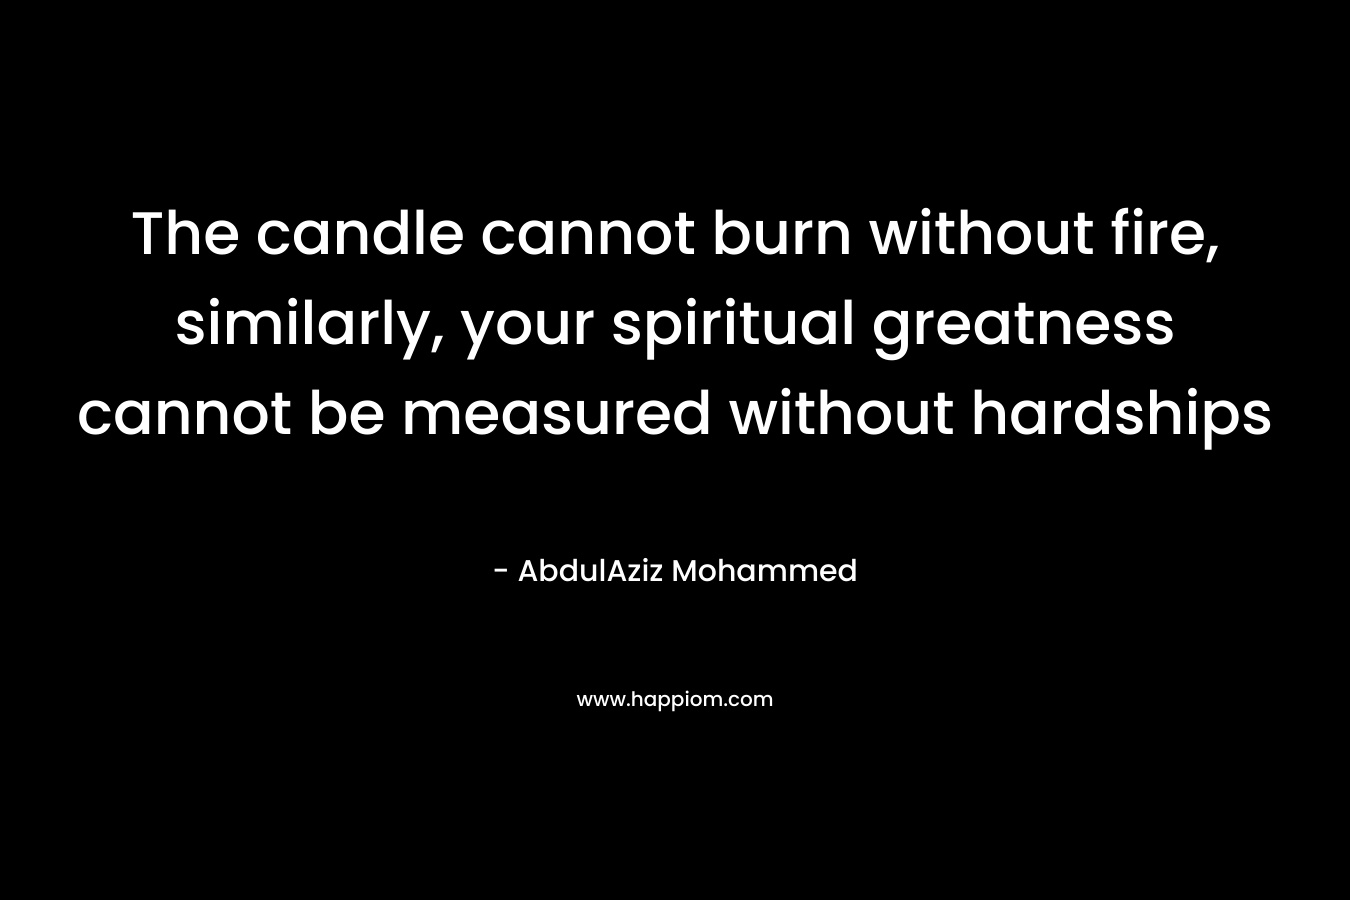 The candle cannot burn without fire, similarly, your spiritual greatness cannot be measured without hardships